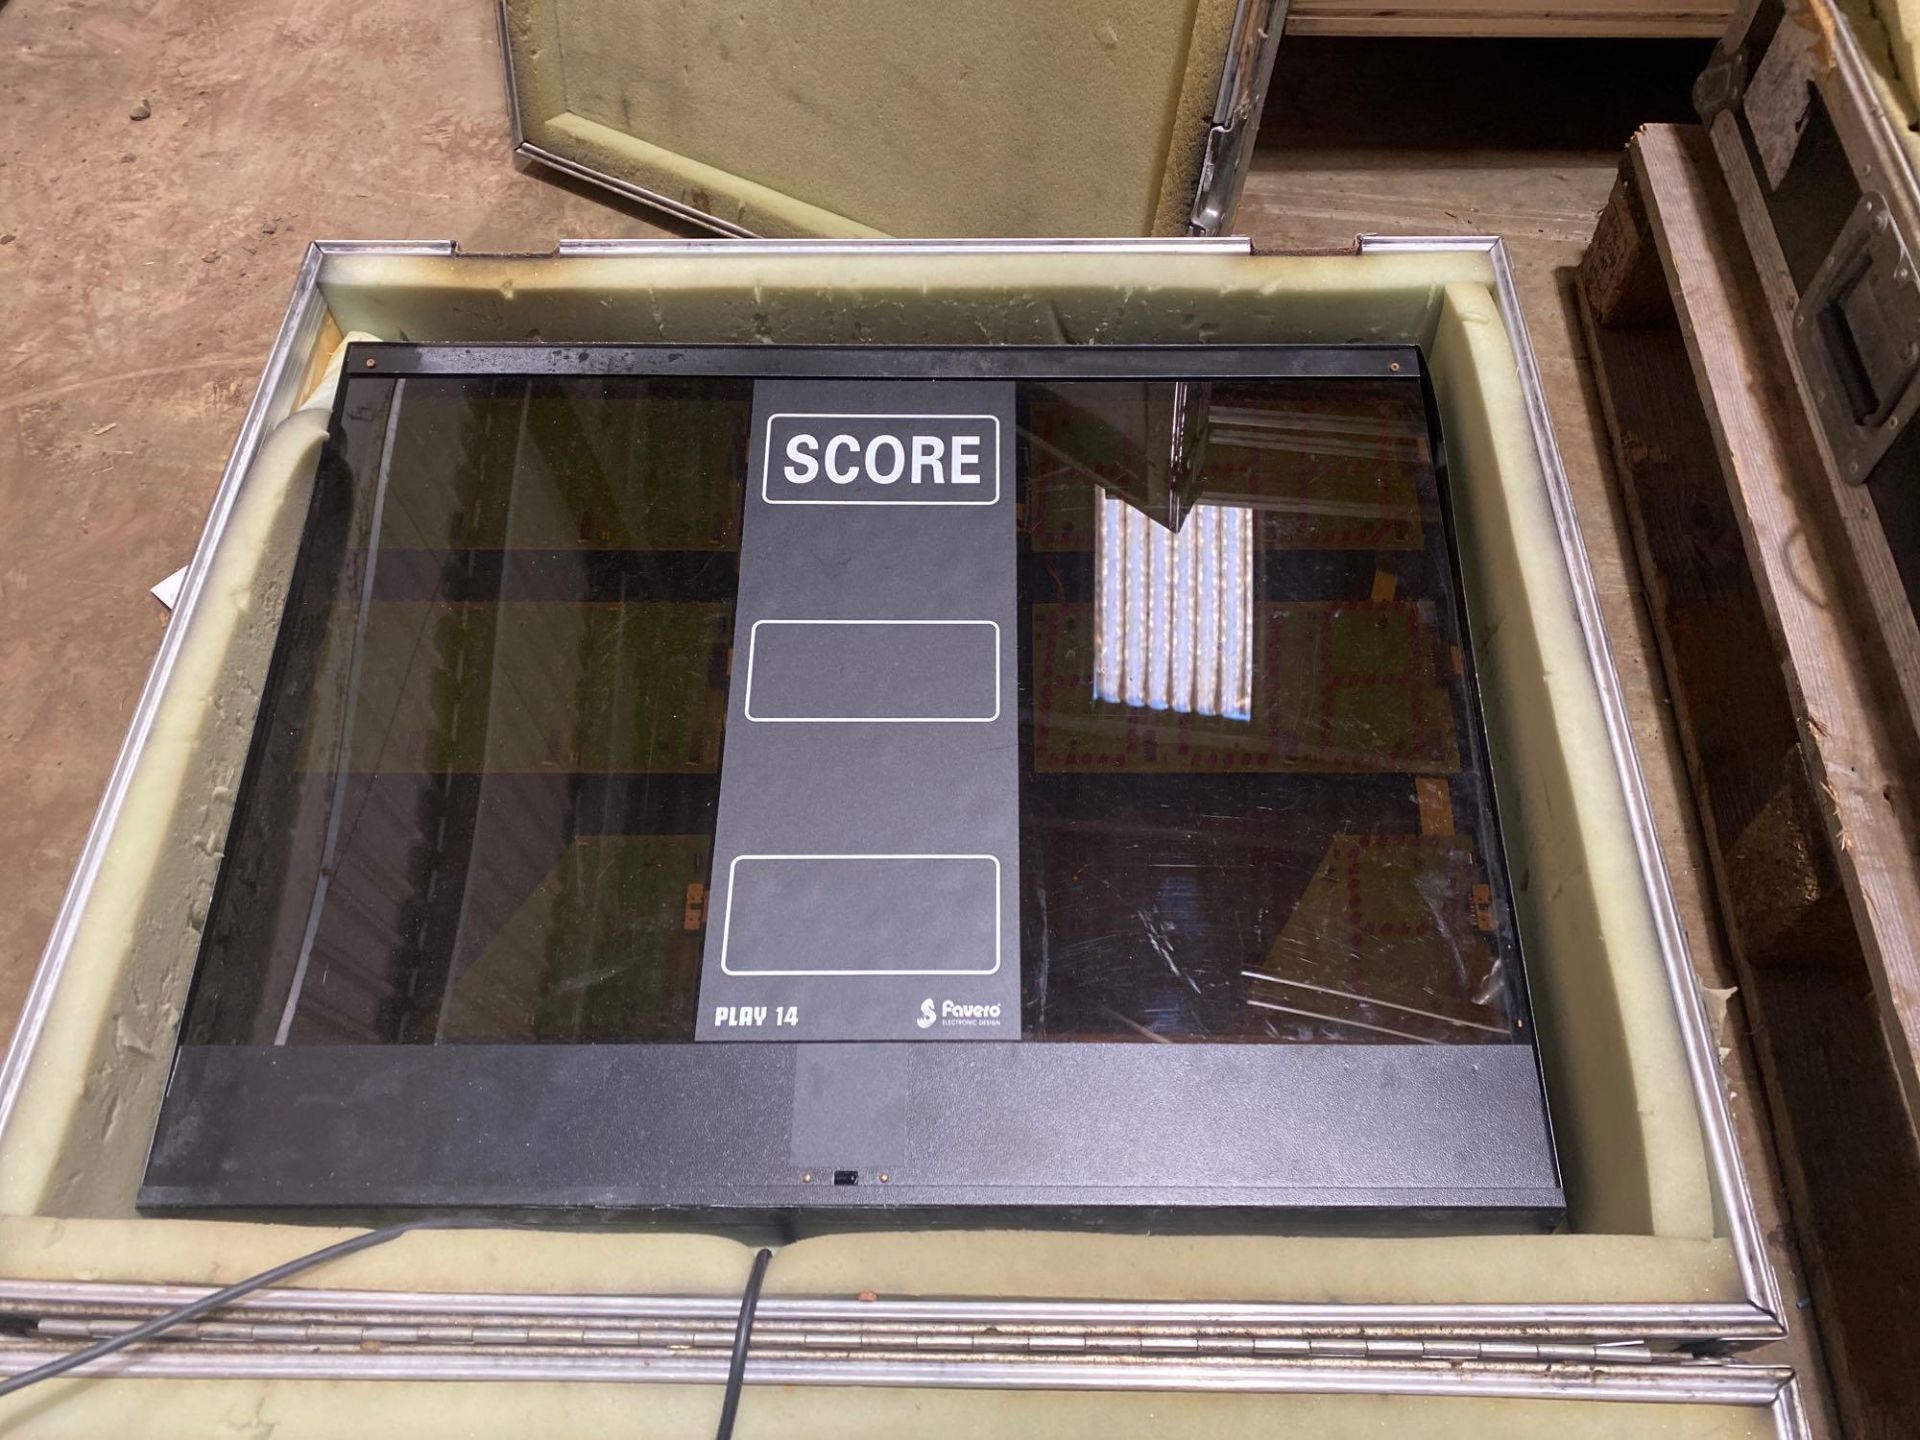 Two large Favero electronic design play 14 digital scoreboard complete with flight cases (scoreboard - Image 4 of 8